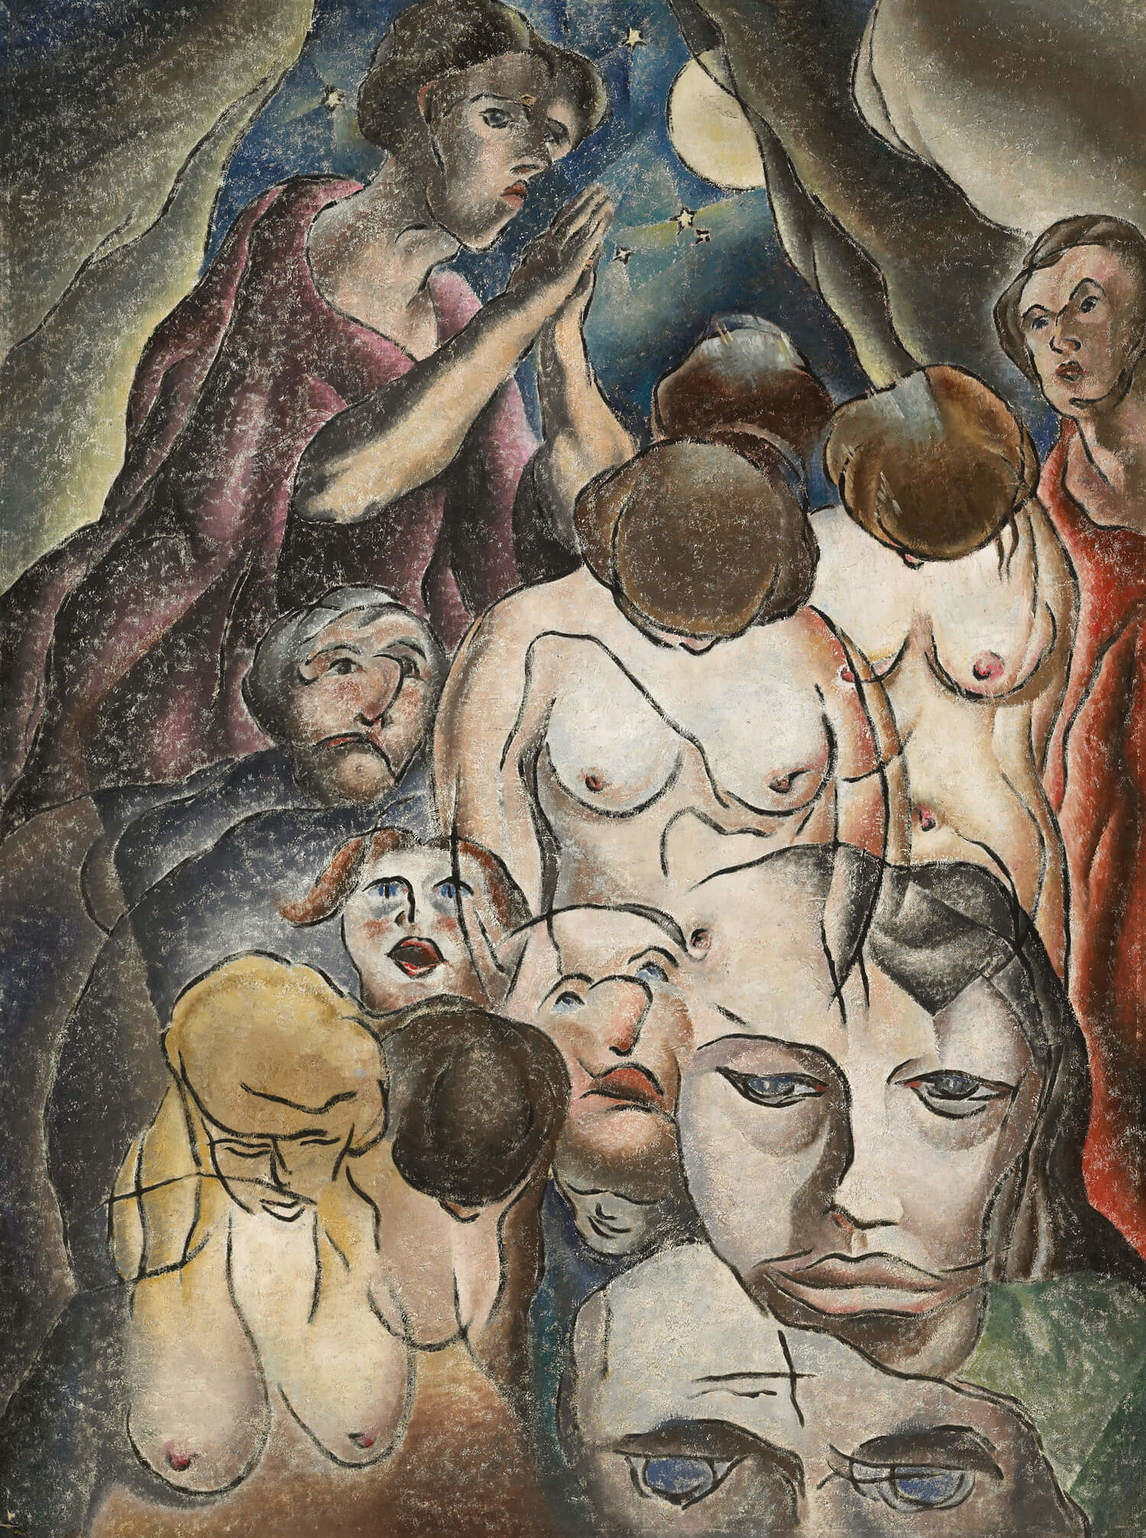 The Insulted and Injured (Les offensés et blessés), 1934-1935